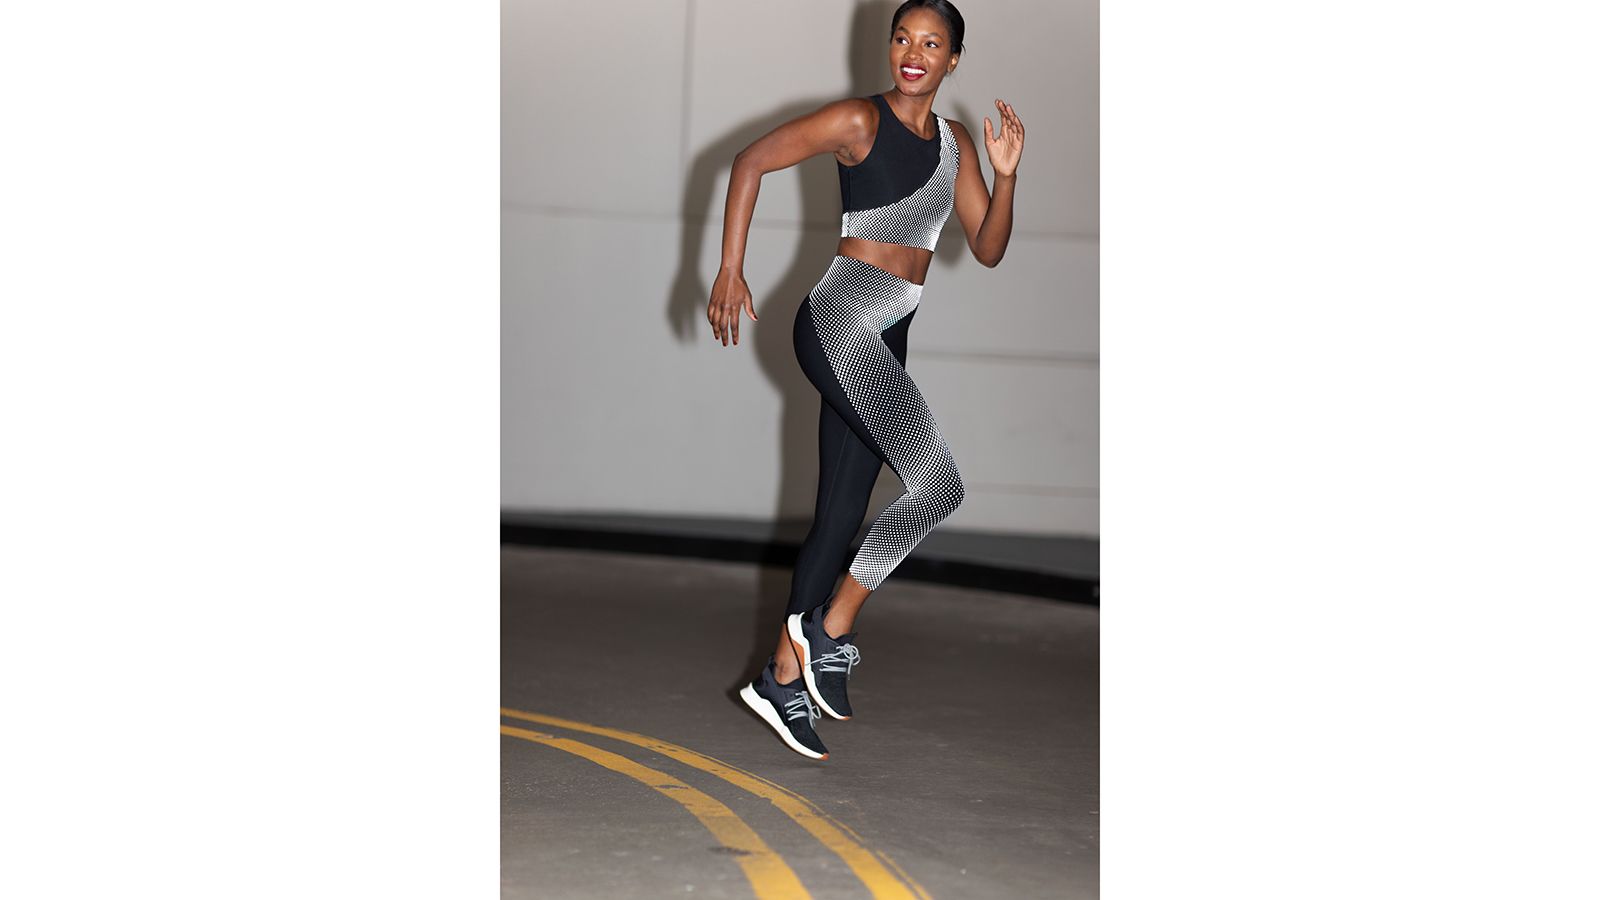 Winter Workout Gear That'll Make Your Cold Workouts Way Less Miserable